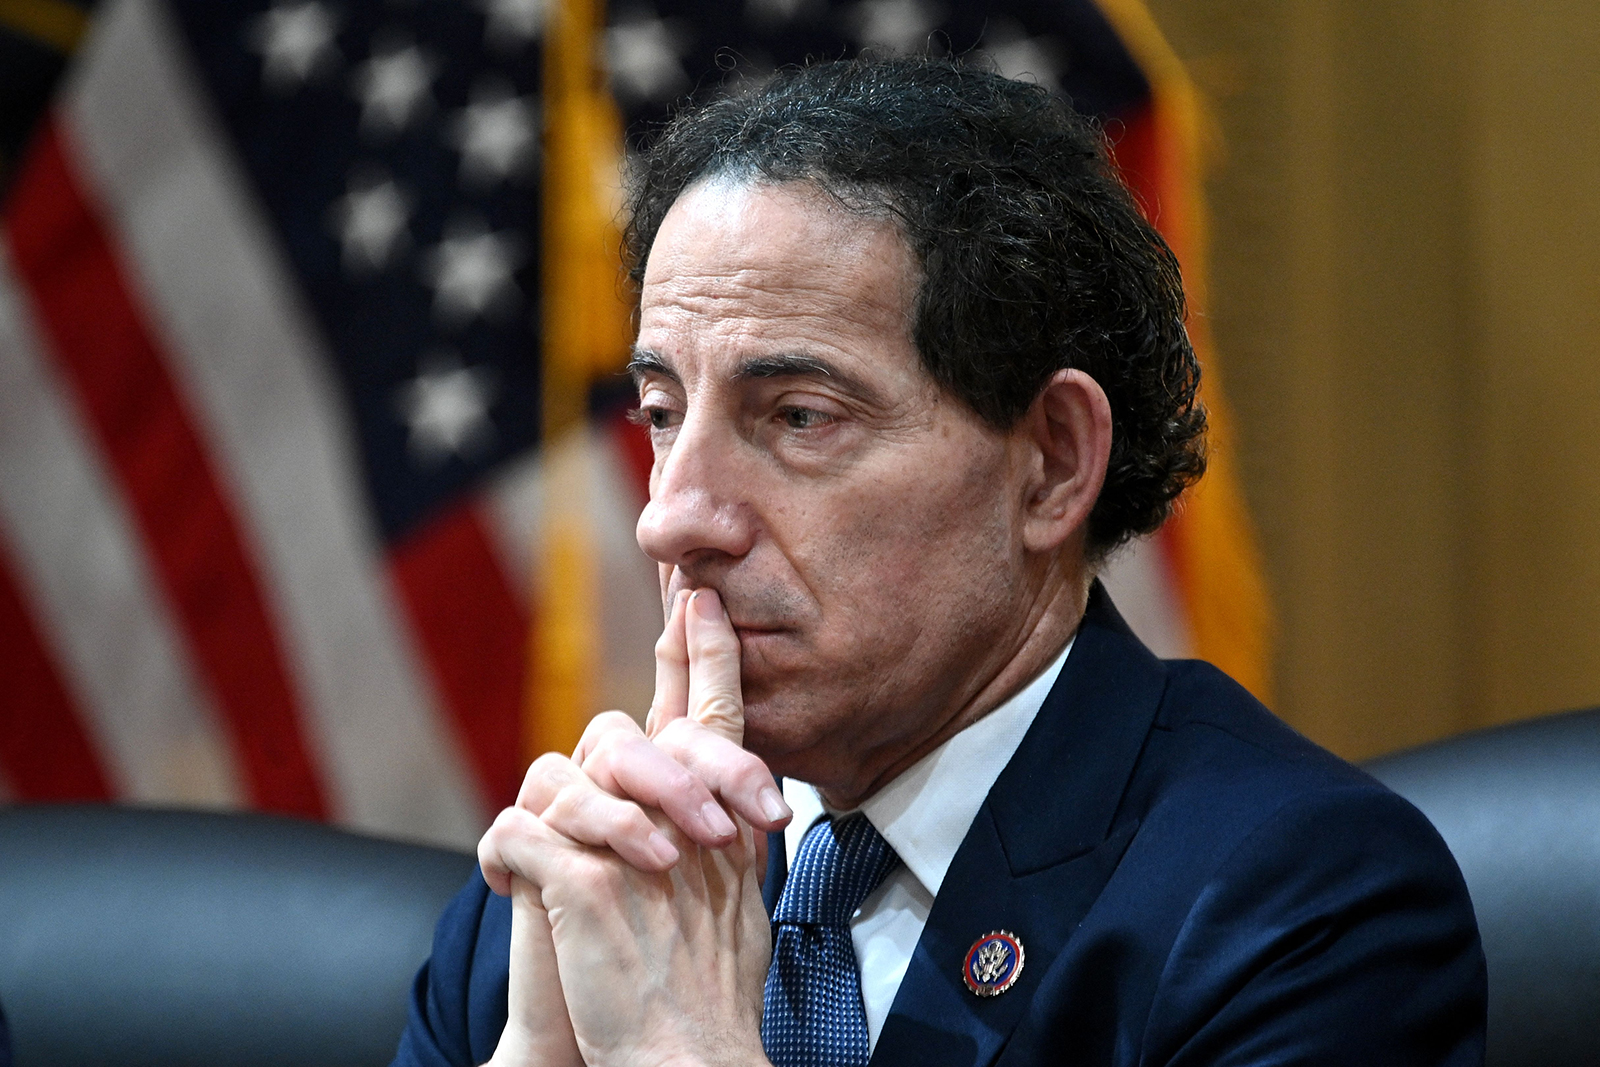 US Representative Jamie Raskin attends a House Select Committee hearing to Investigate the January 6th Attack on the US Capitol, in the Cannon House Office Building on Capitol Hill in Washington, DC on June 9.